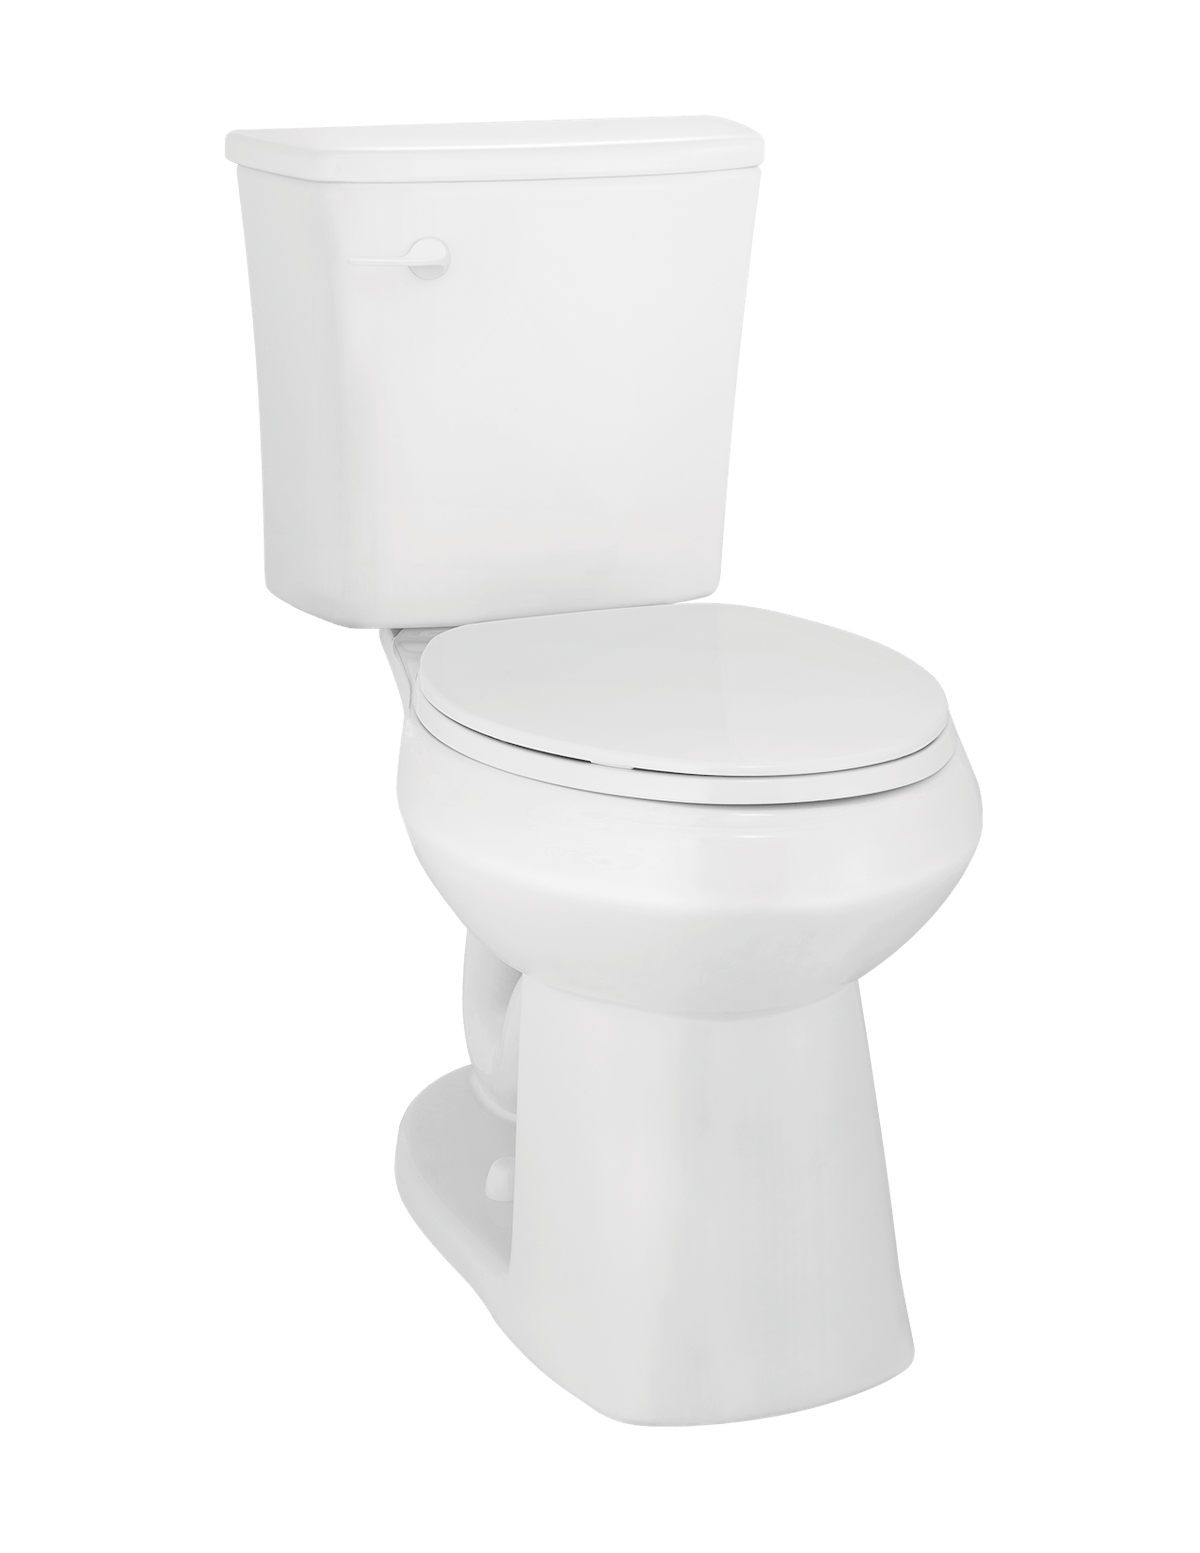 Niagara&rsquo;s toilets, including the Shadow model, are designed to last a lifetime so you don&rsquo;t have to worry about taking the toilet to a recycling center.